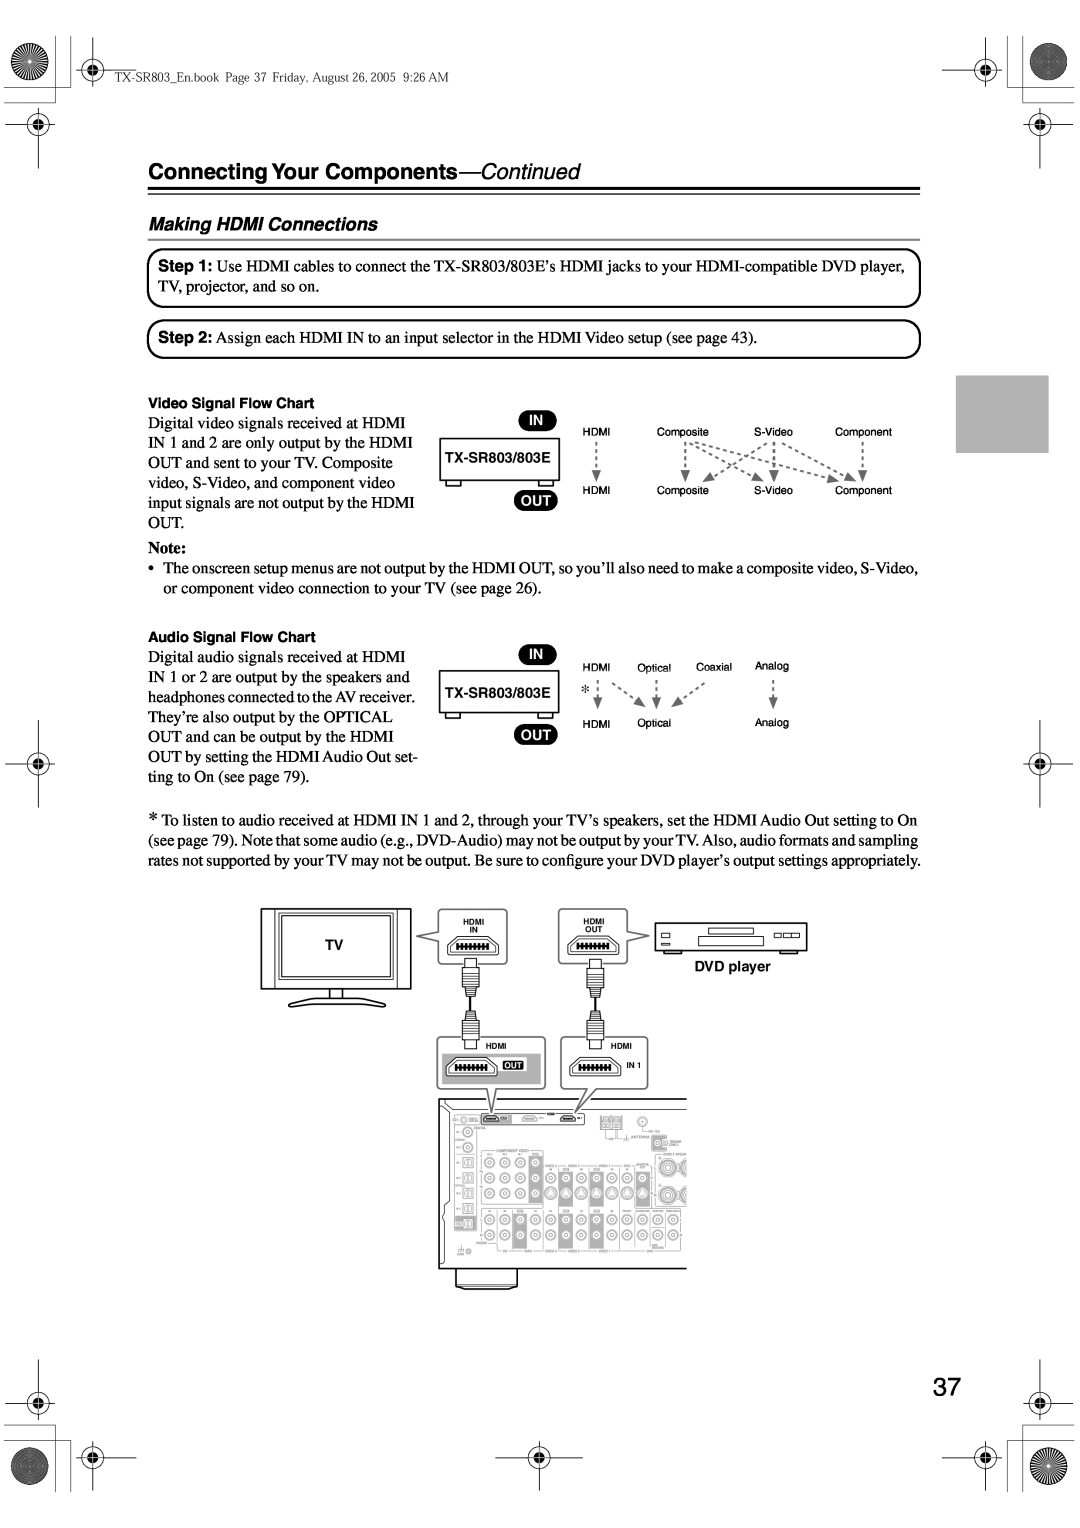 Onkyo TX-SR703E Making HDMI Connections, Connecting Your Components—Continued, Video Signal Flow Chart, TX-SR803/803E 